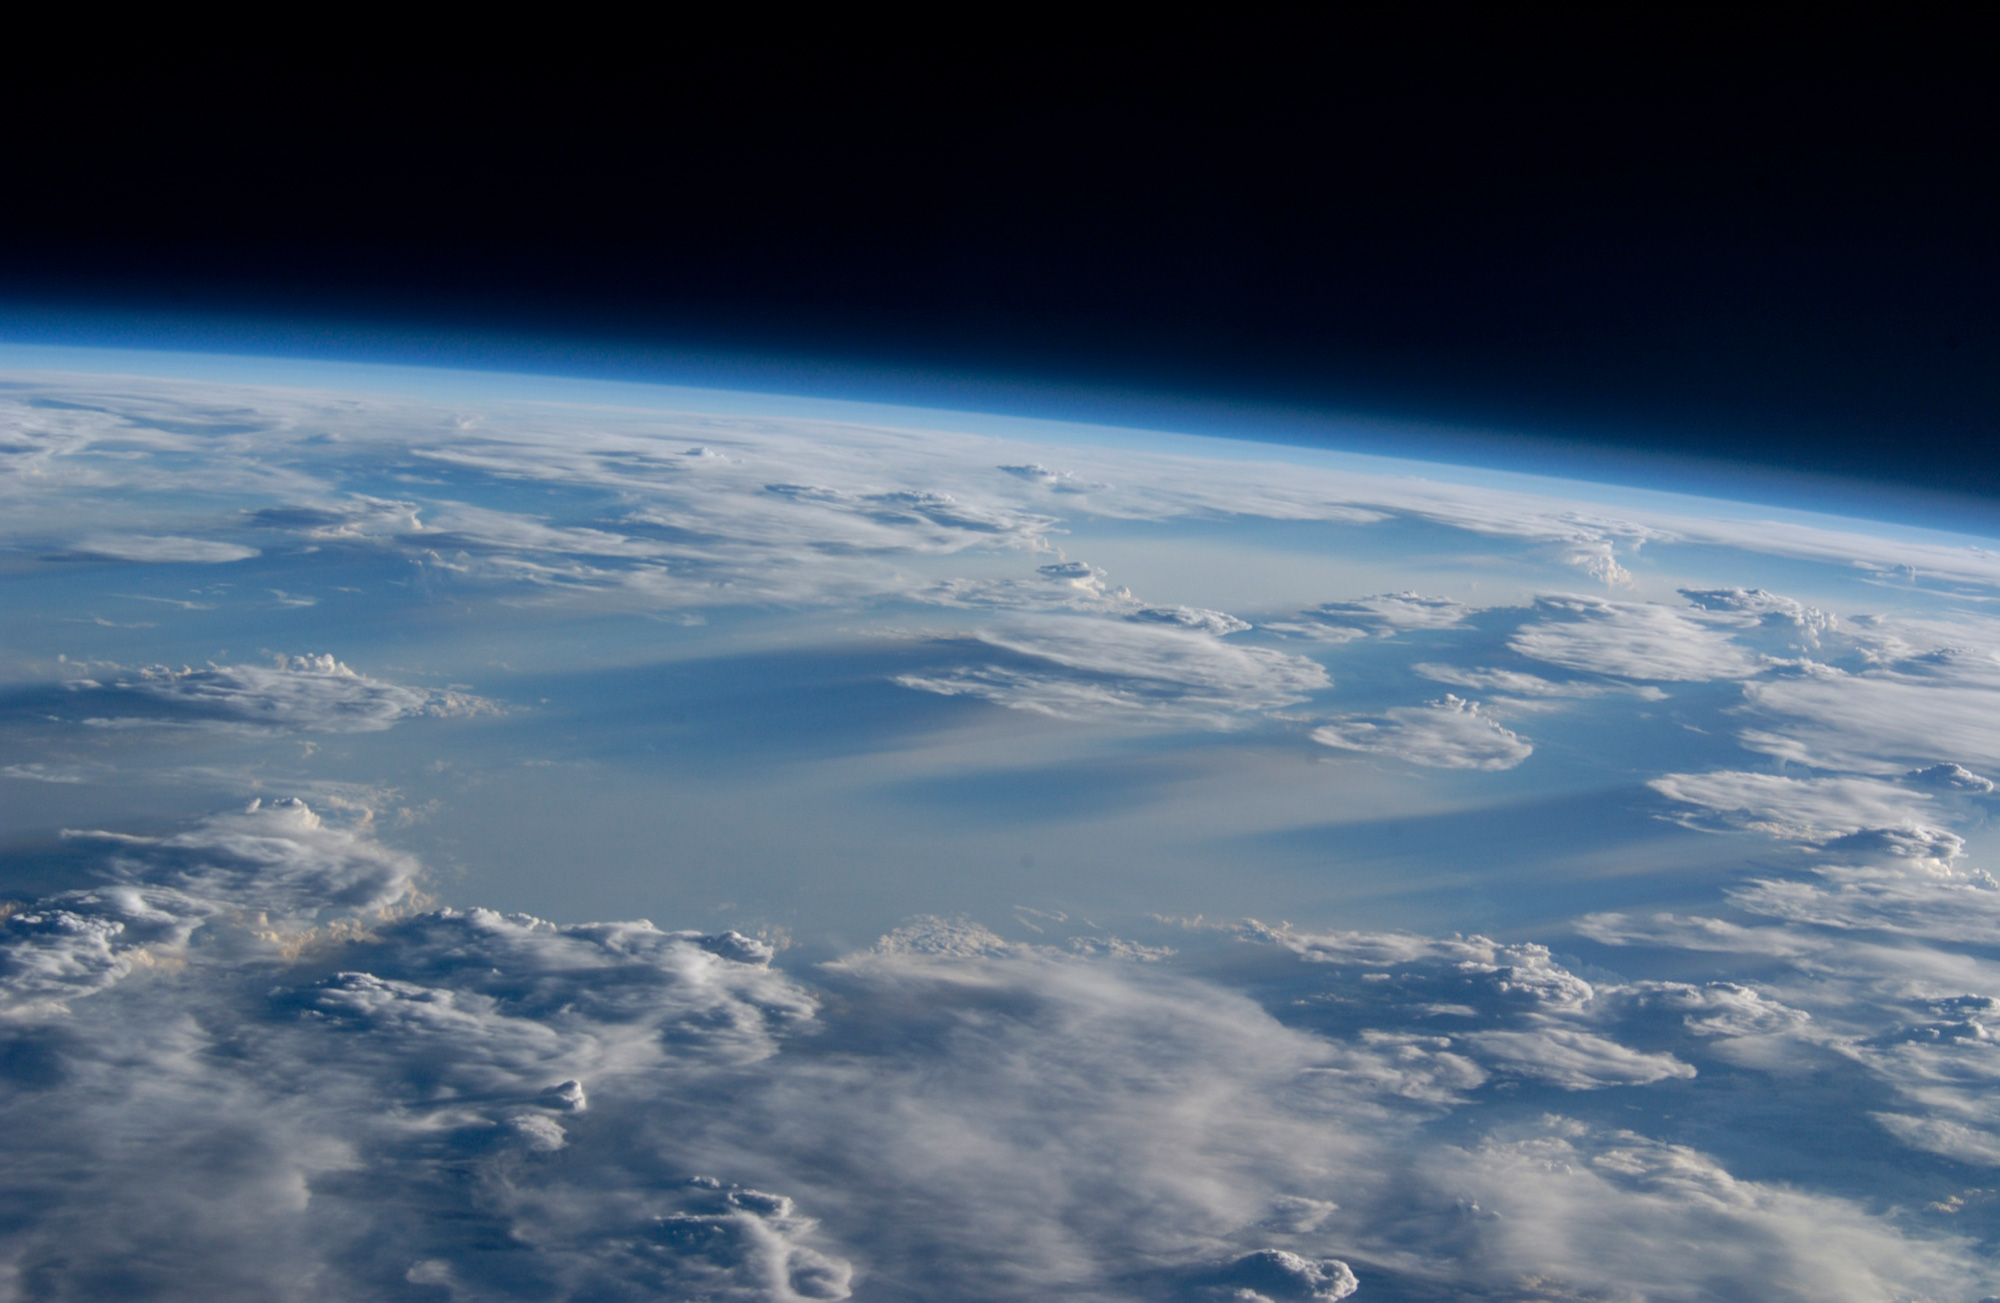 Wacky weather punched a new hole in the ozone—and it could happen again